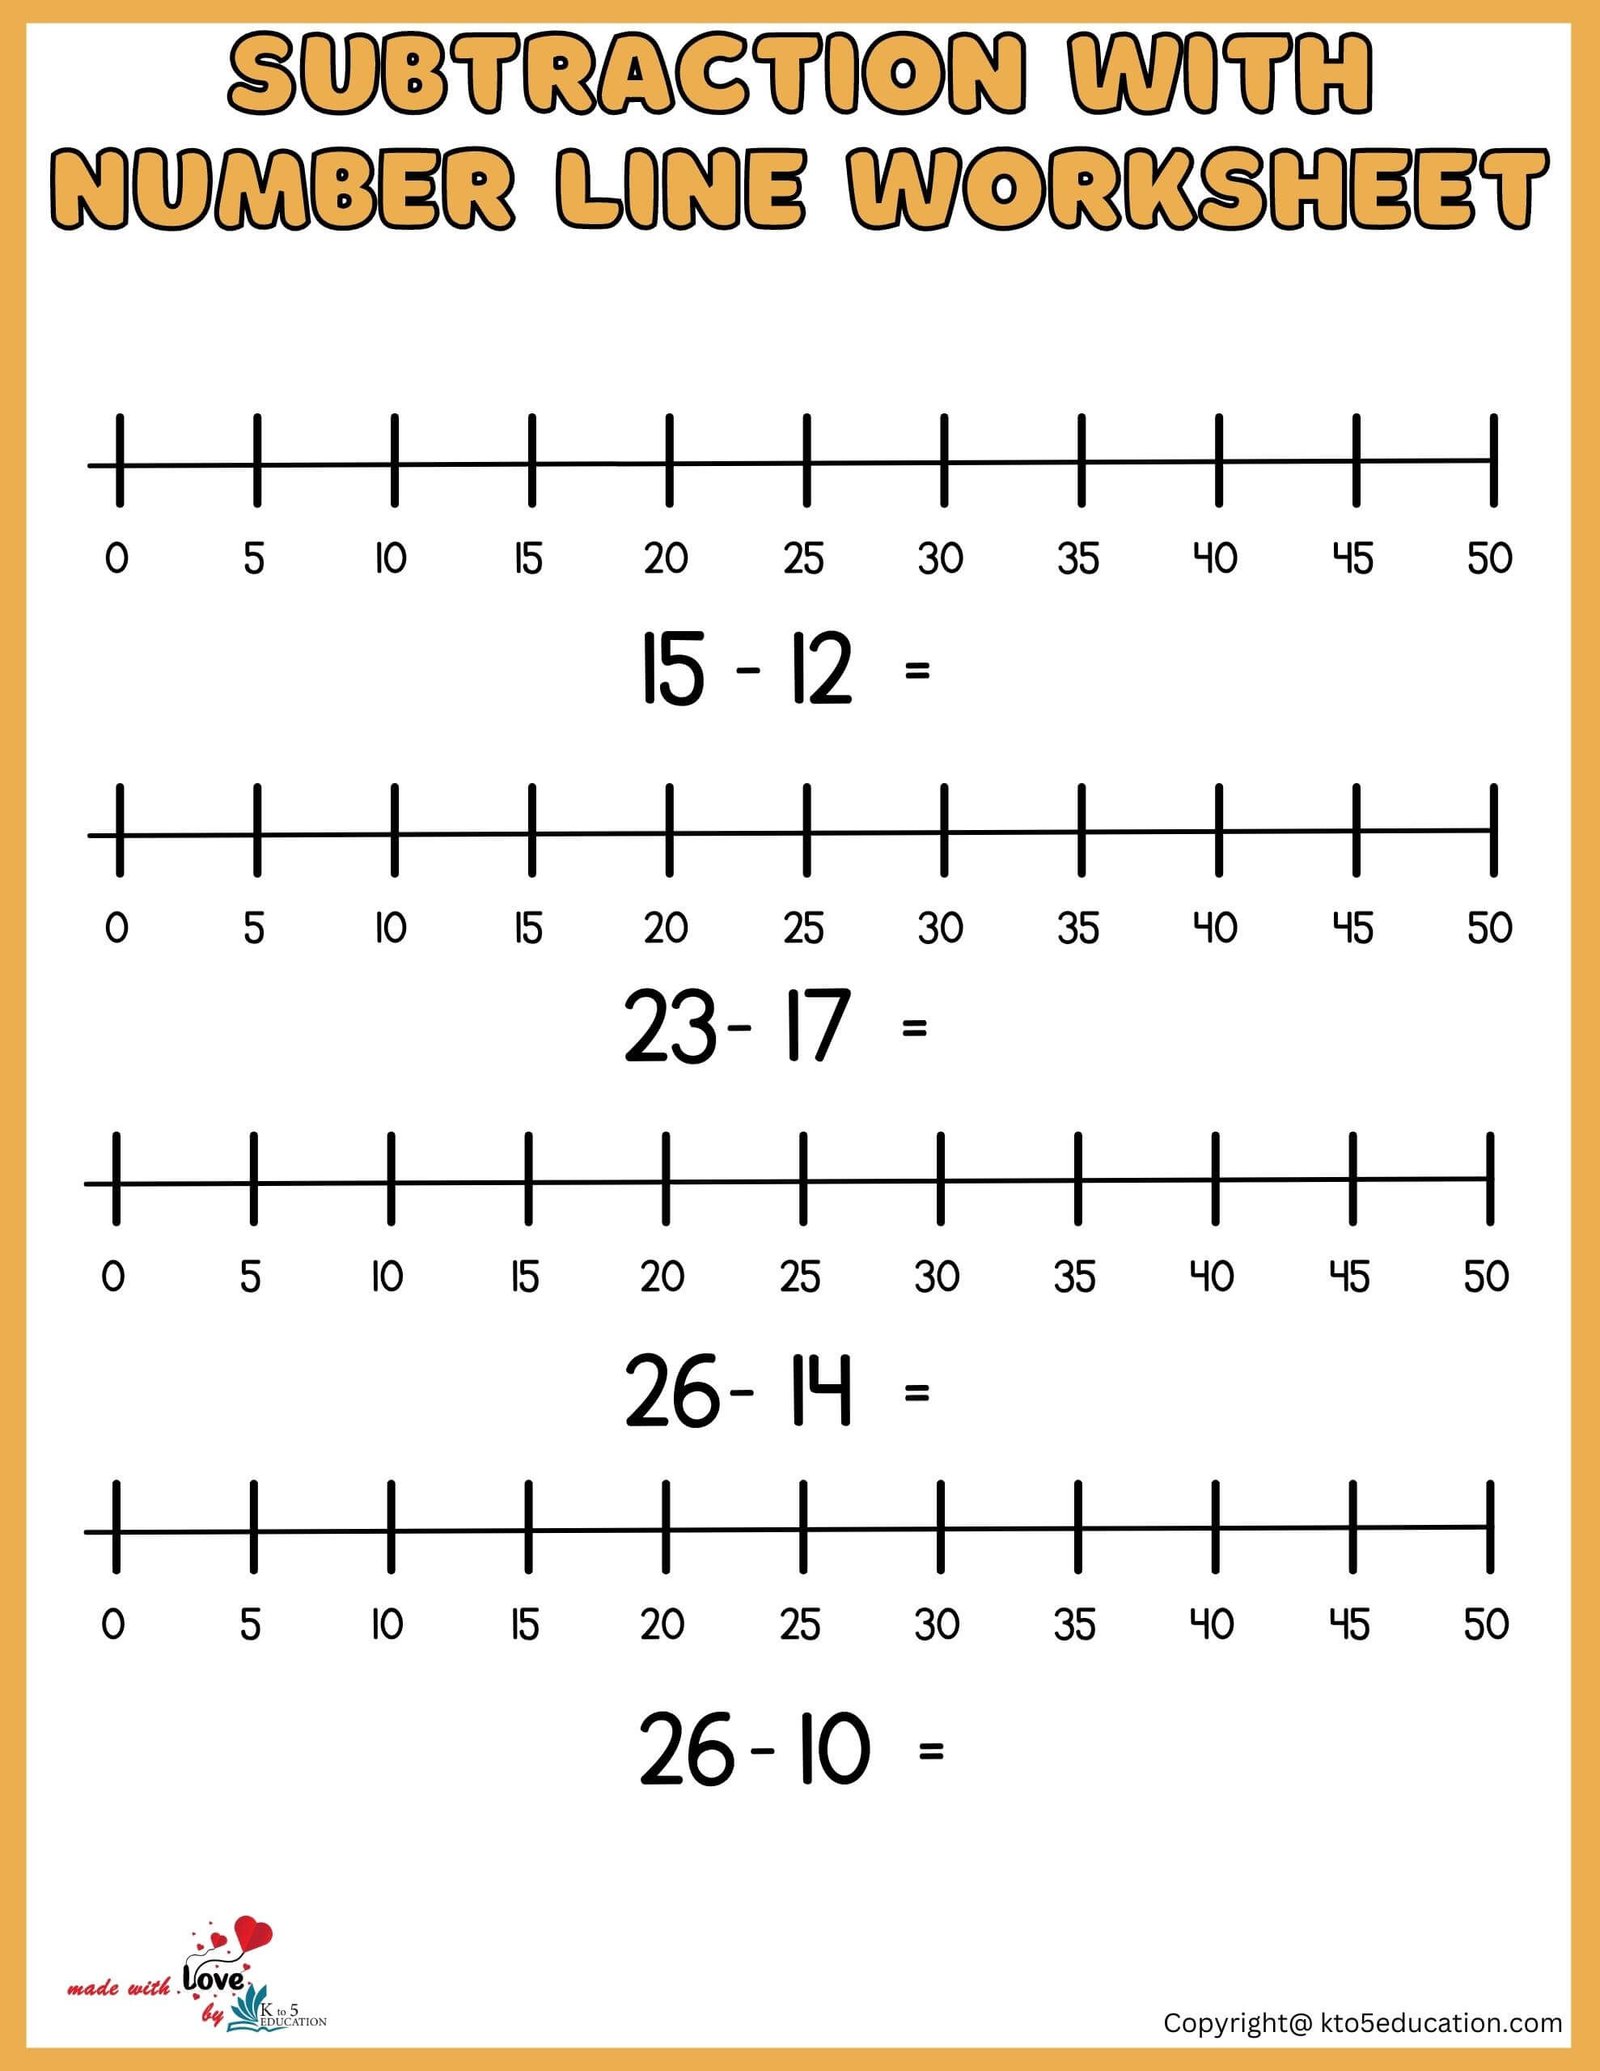 Subtractions With Number Line Worksheets 1-50